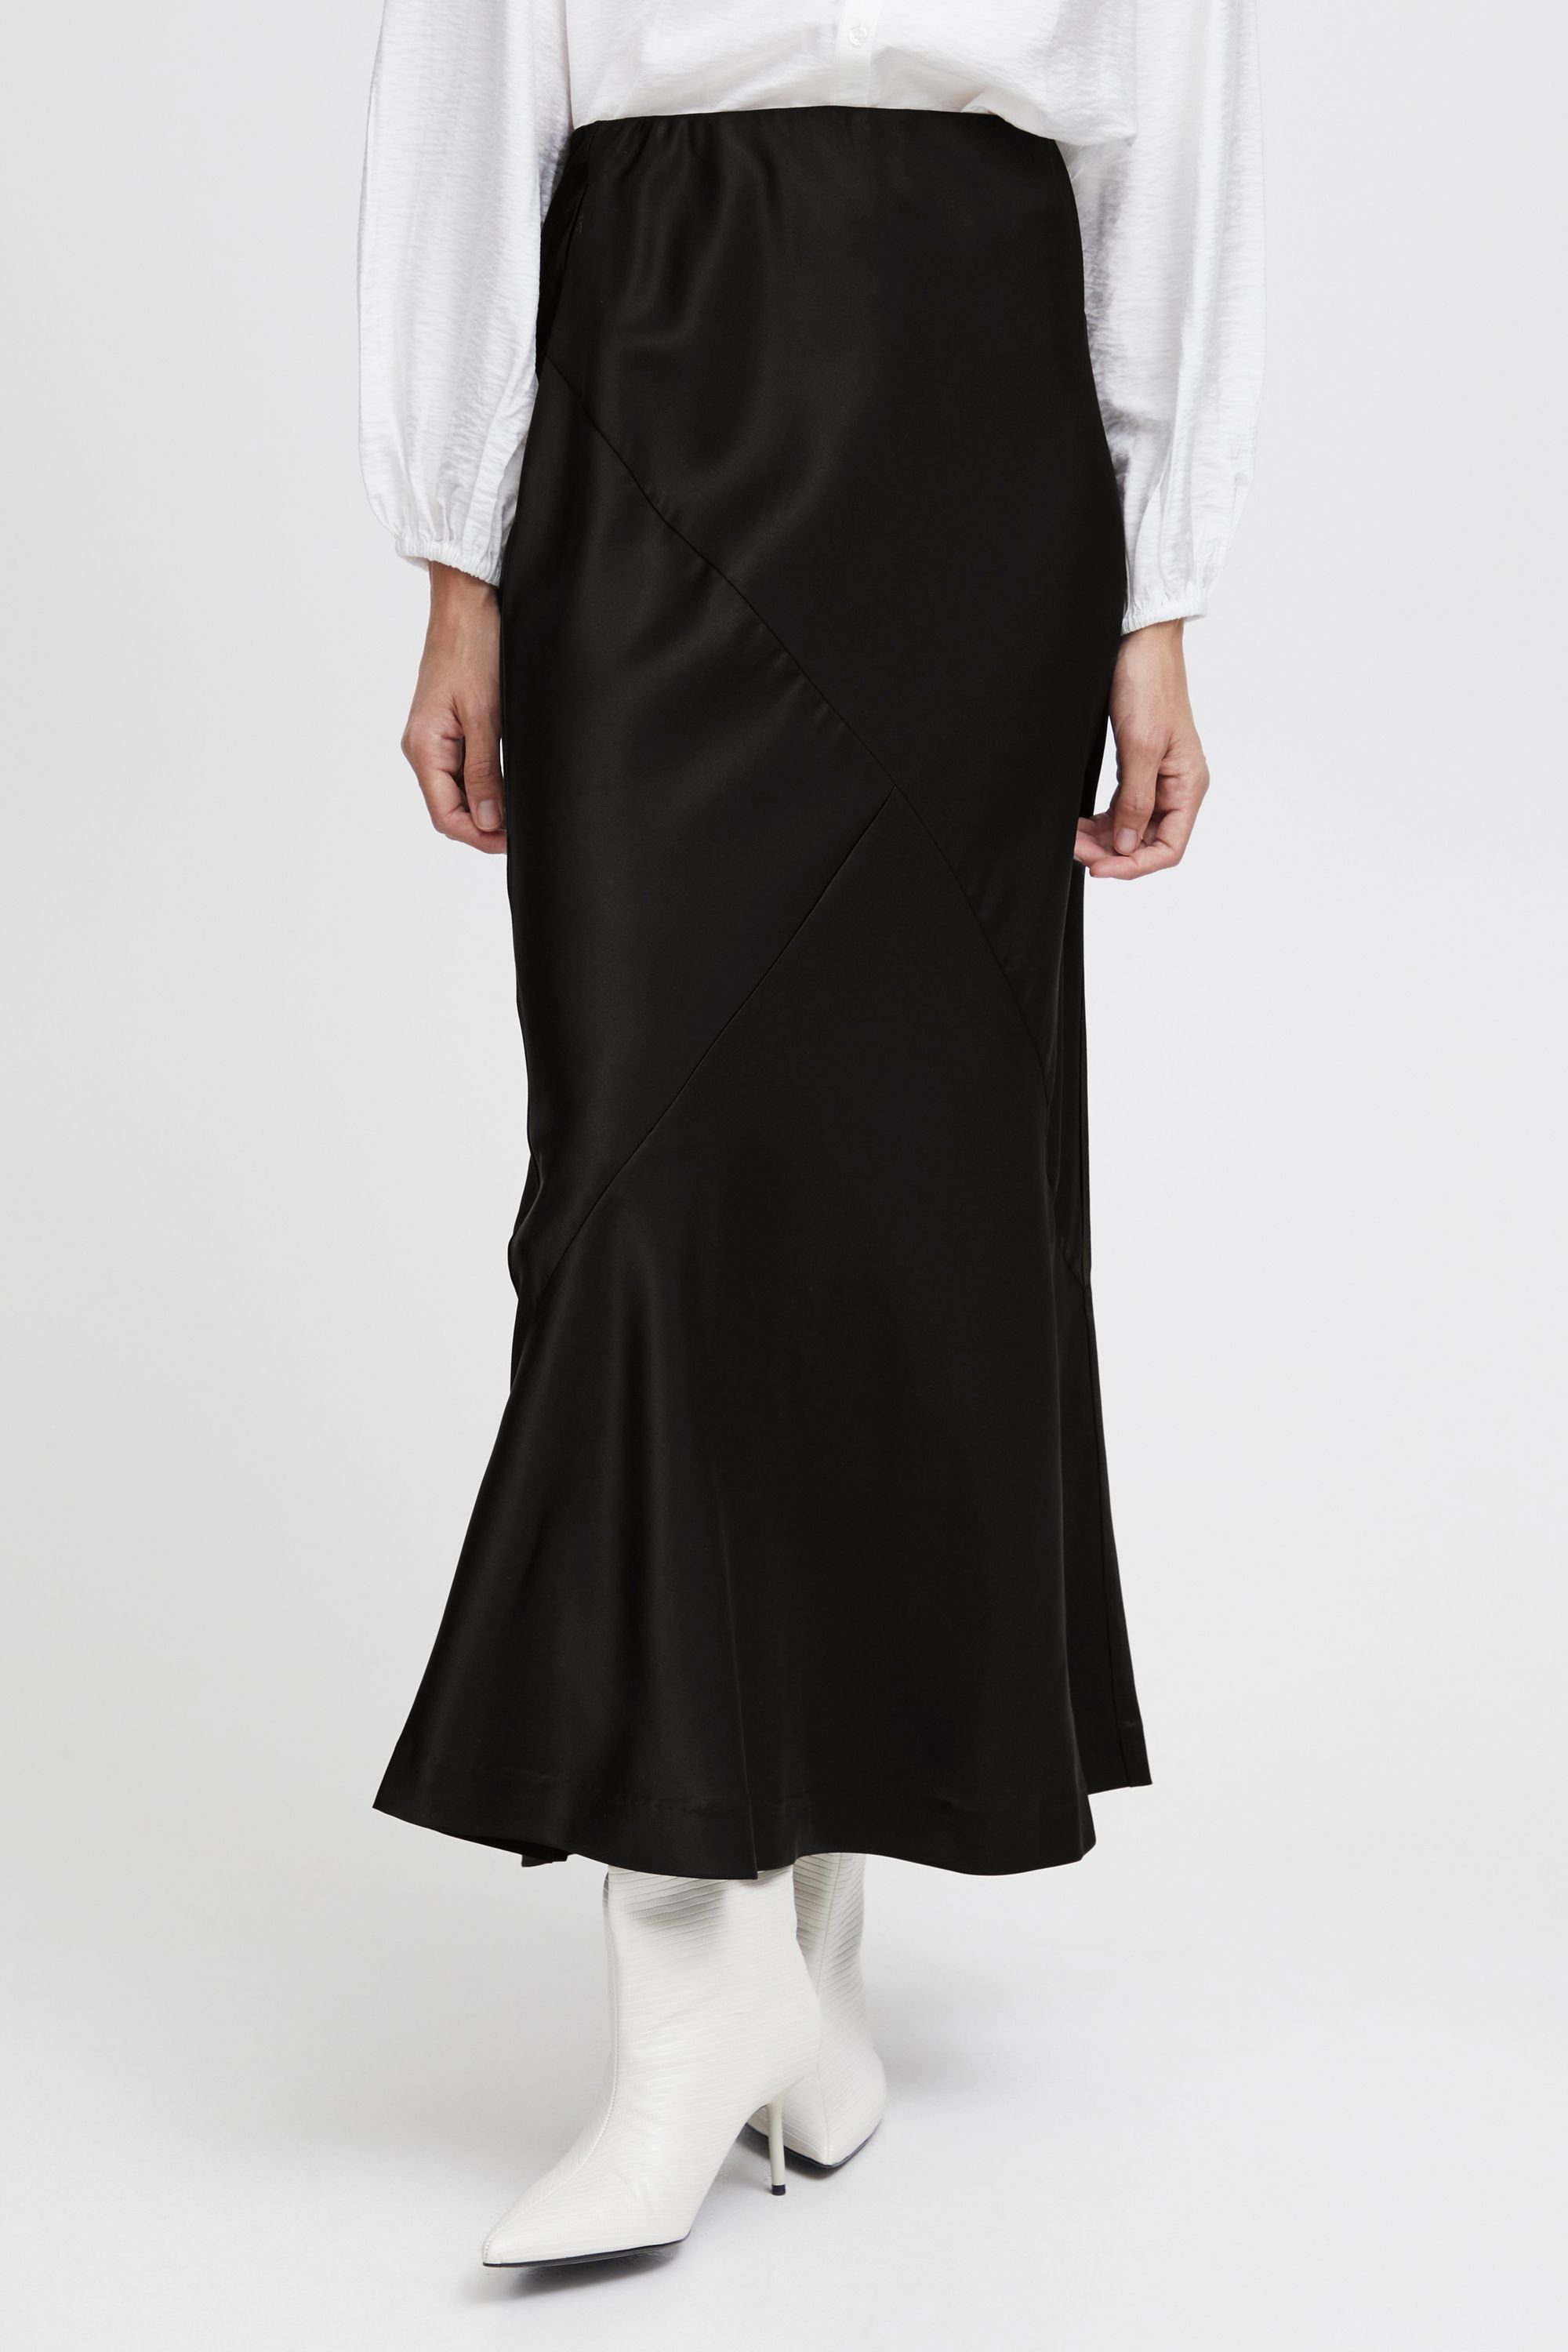 b.young A-Linien-Rock BYDOLORA SKIRT - 20813858